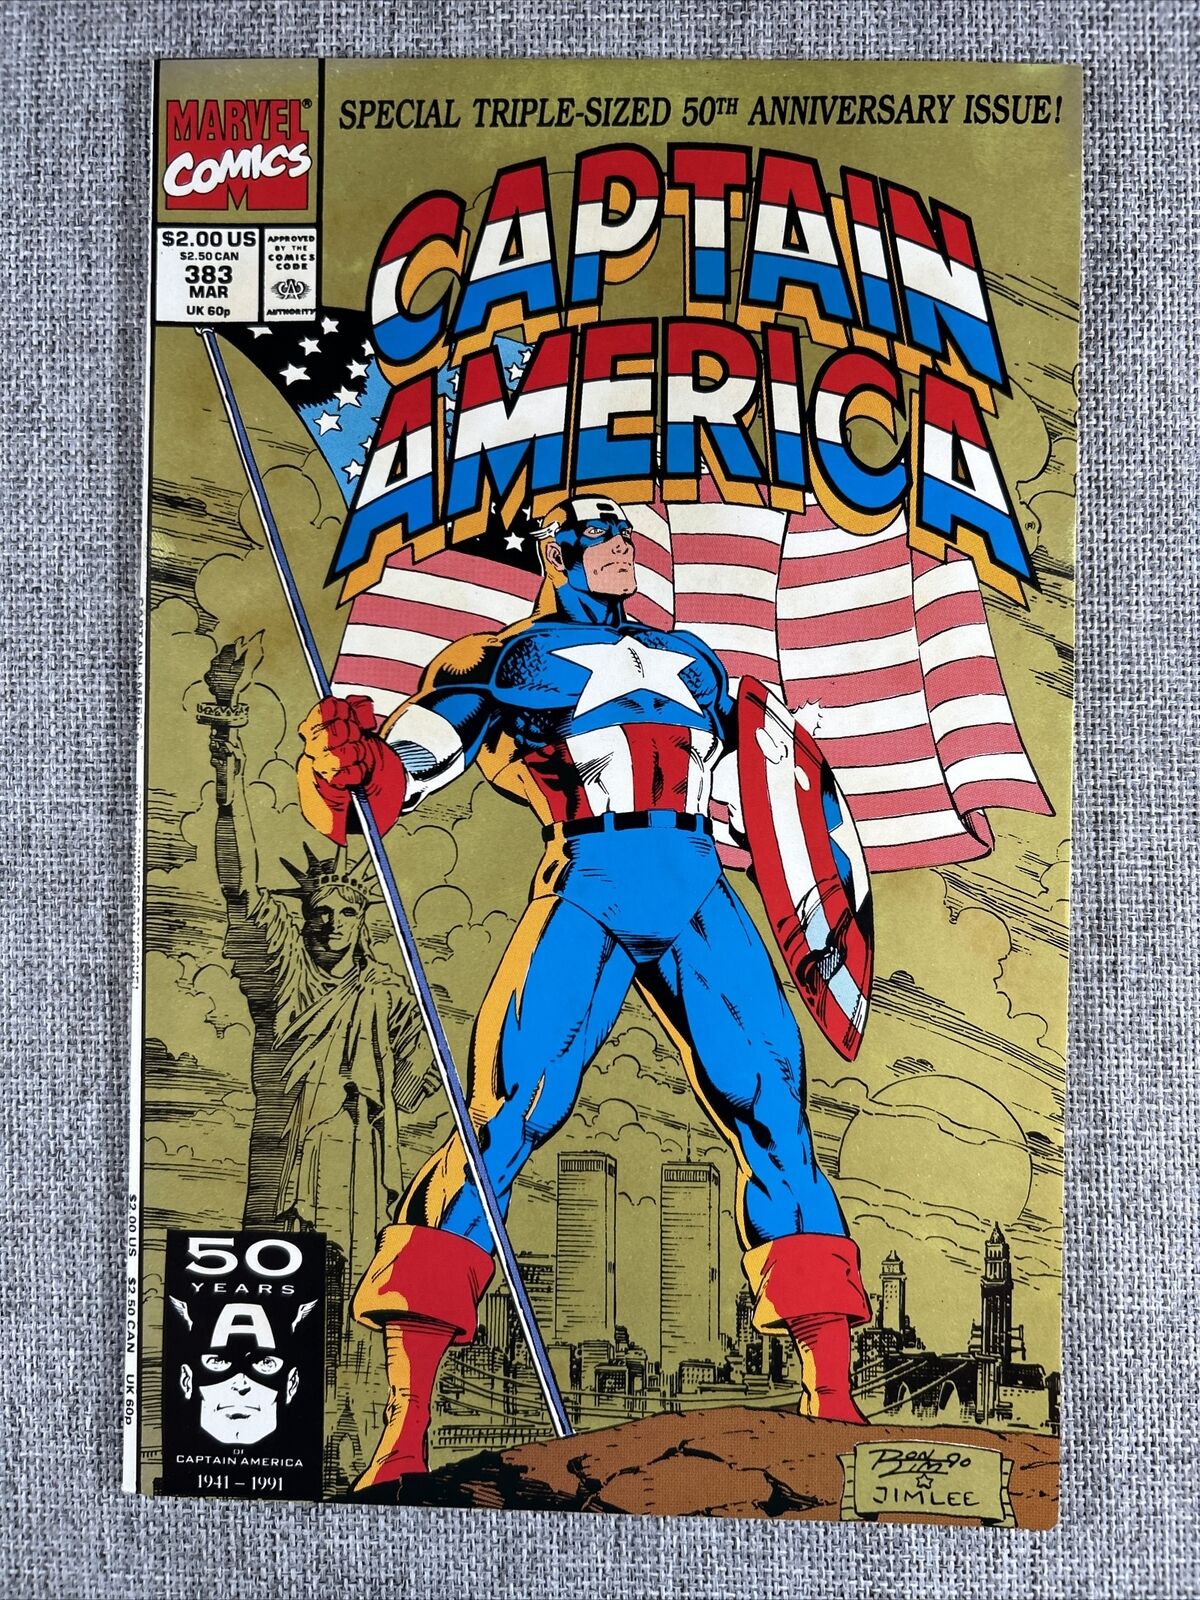 Captain America #383 Giant Triple size March 91 Marvel 50th Anniversary Jim Lee